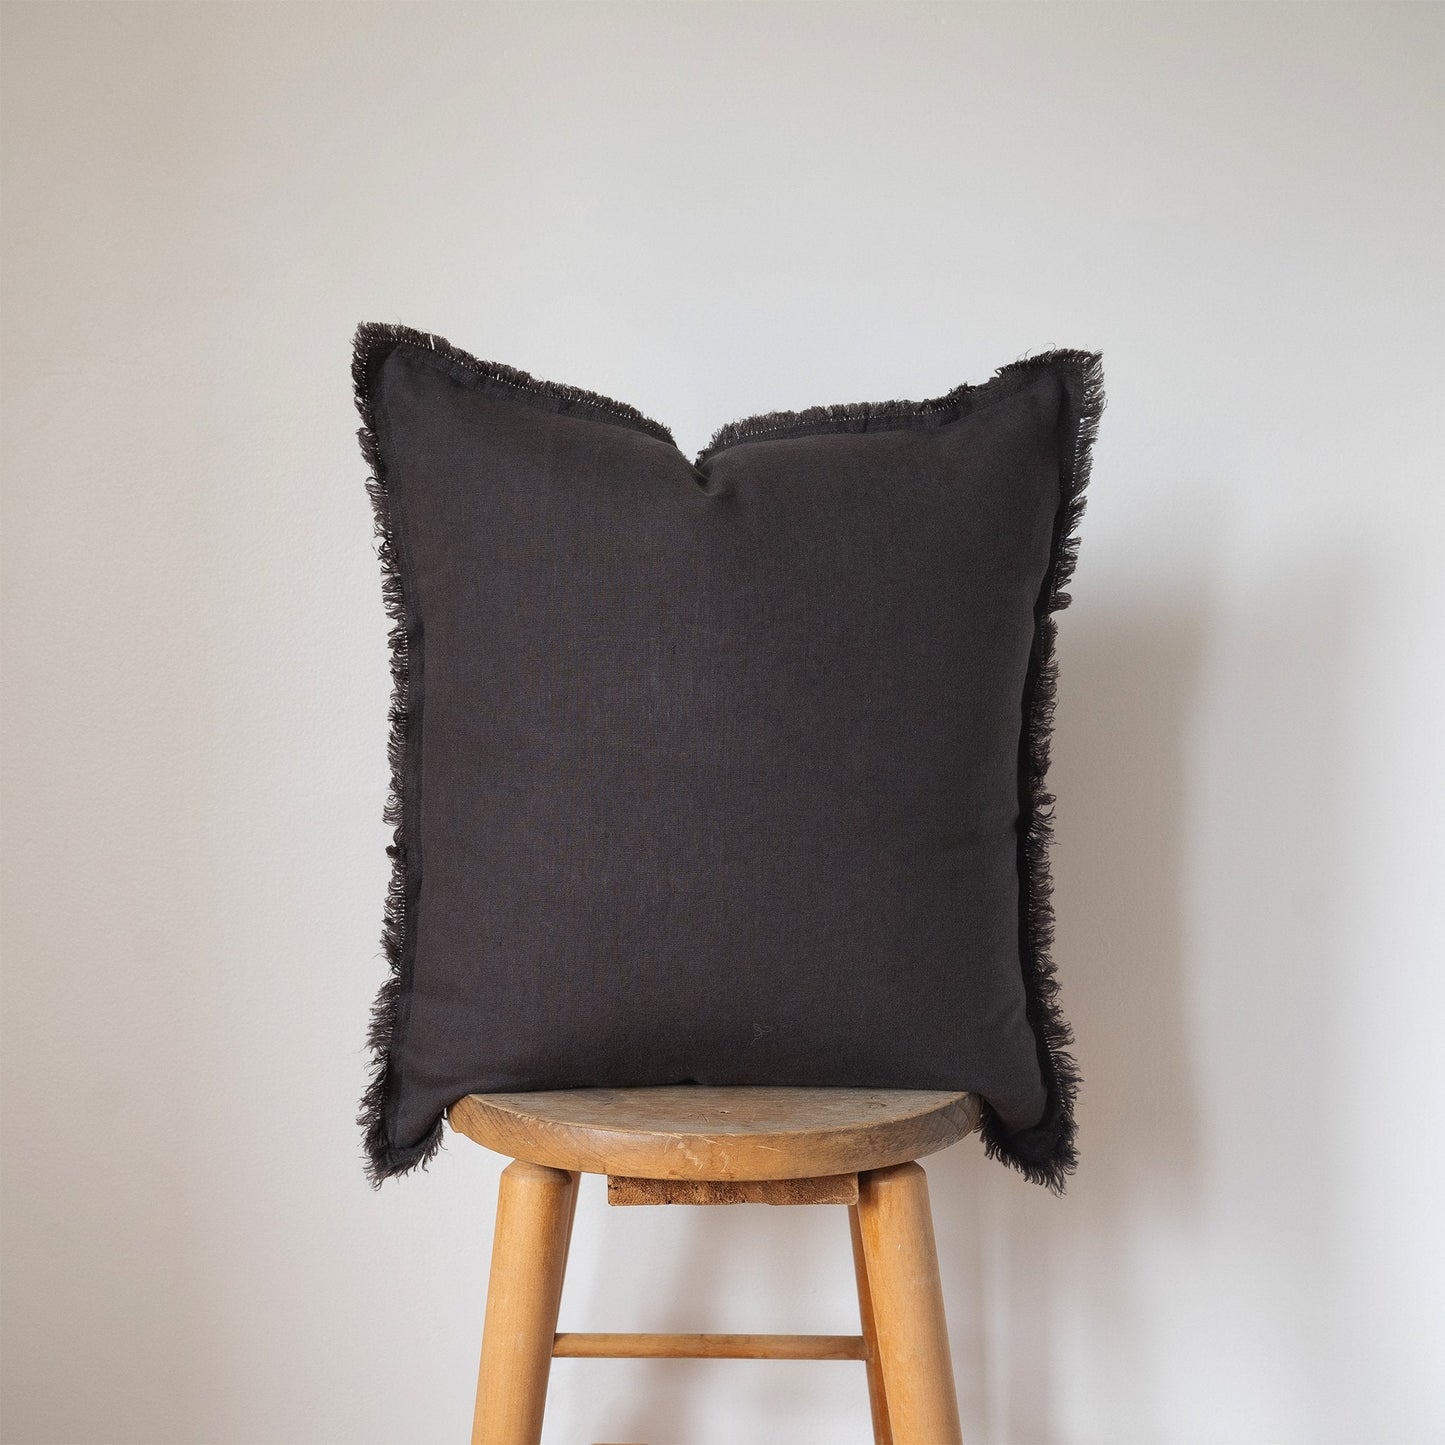 PILLOW, SQUARE FRINGED / LINEN (CHARCOAL)